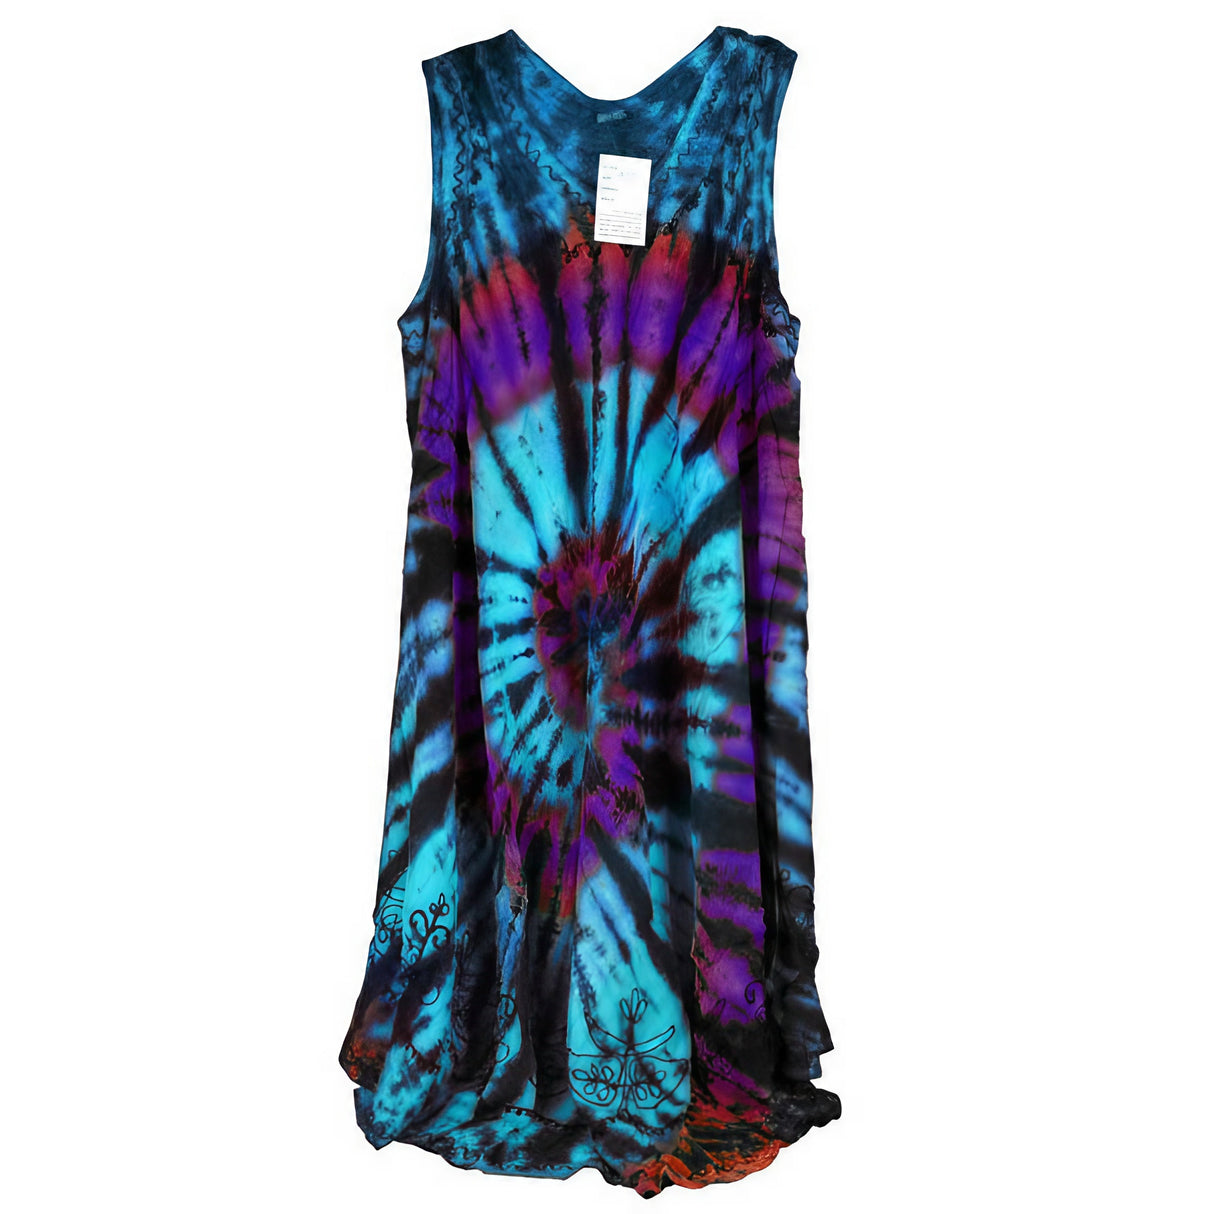 Spiral Tie Dye Dress in vibrant blue and purple hues, 41" length, one size fits all, front view